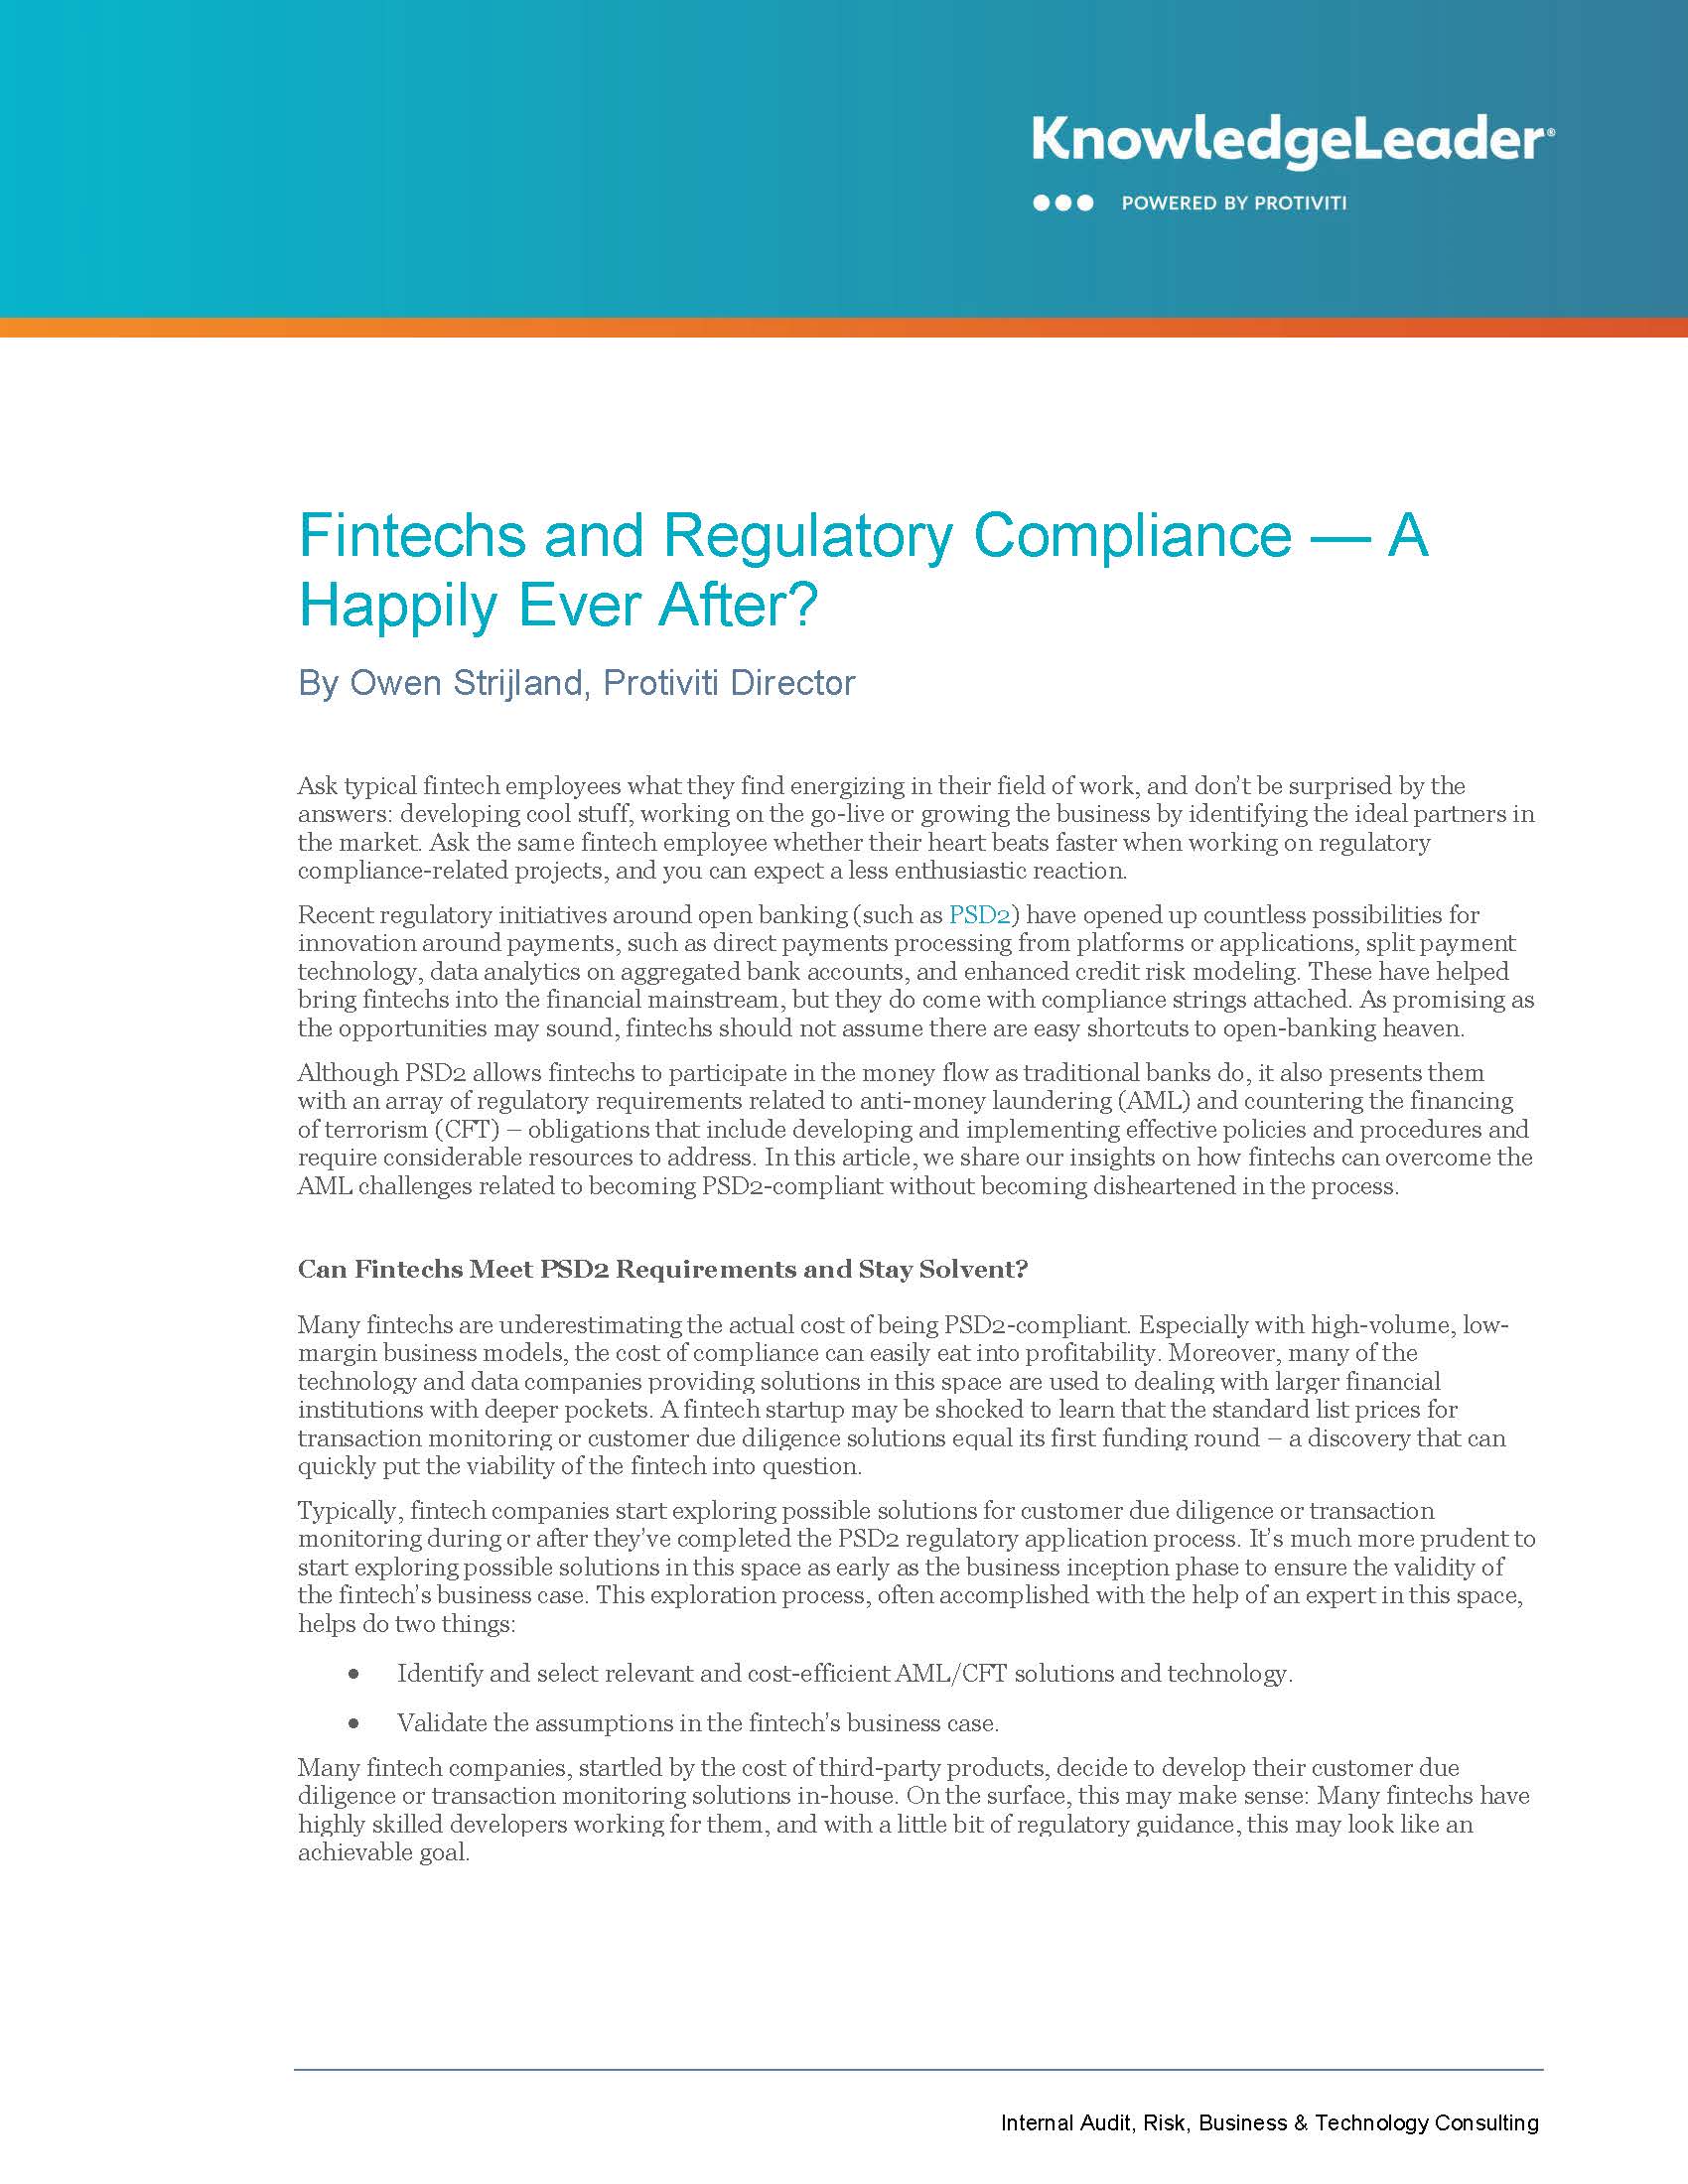 Screenshot of the first page of Fintechs and Regulatory Compliance.